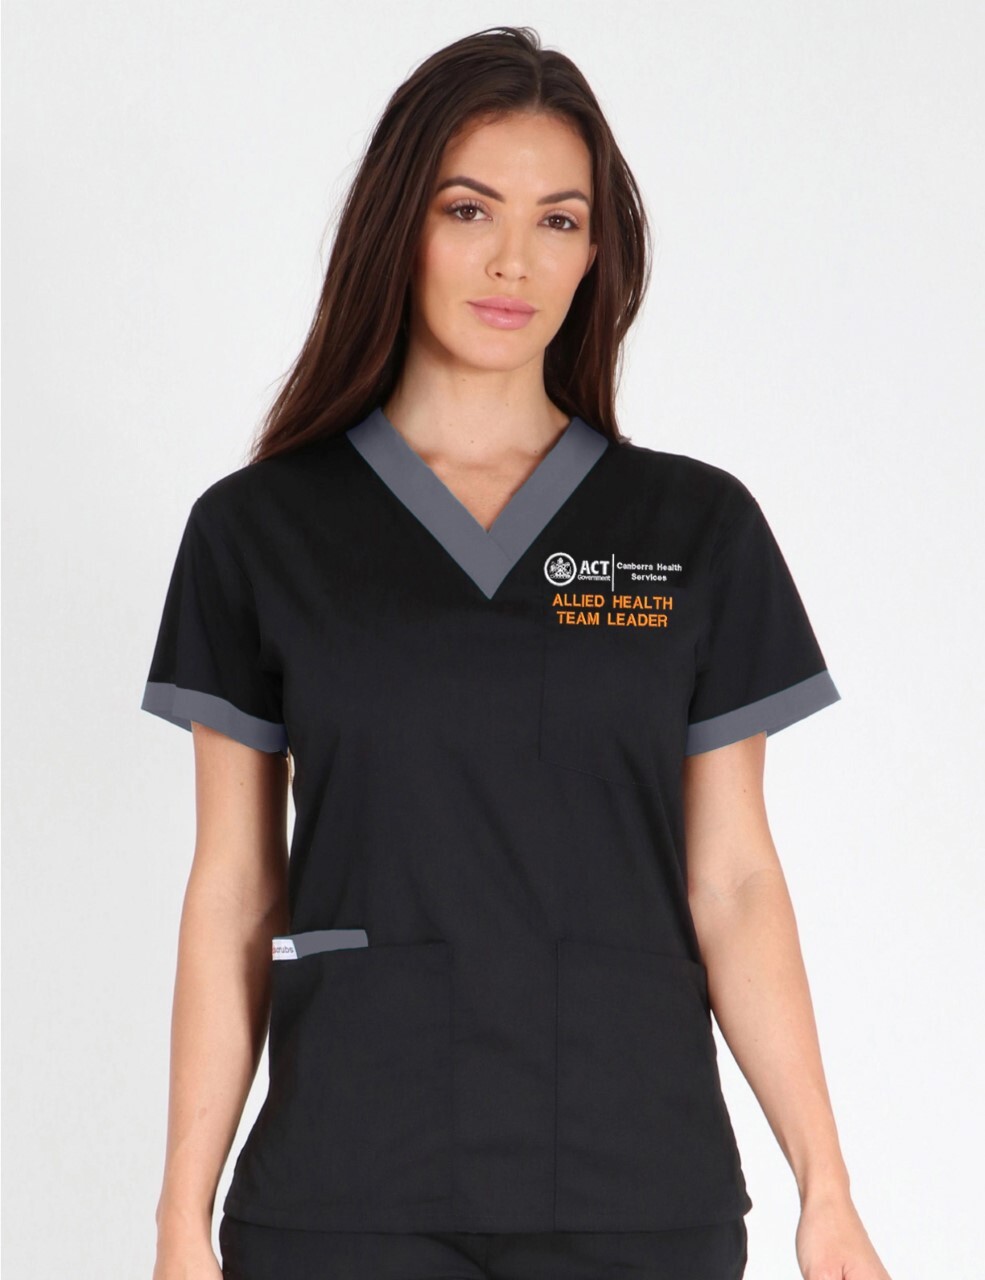 Canberra Hospital - Allied Health Team Leader (Contrast 4 Pkt in Black with Steel Grey Trim incl Logos)